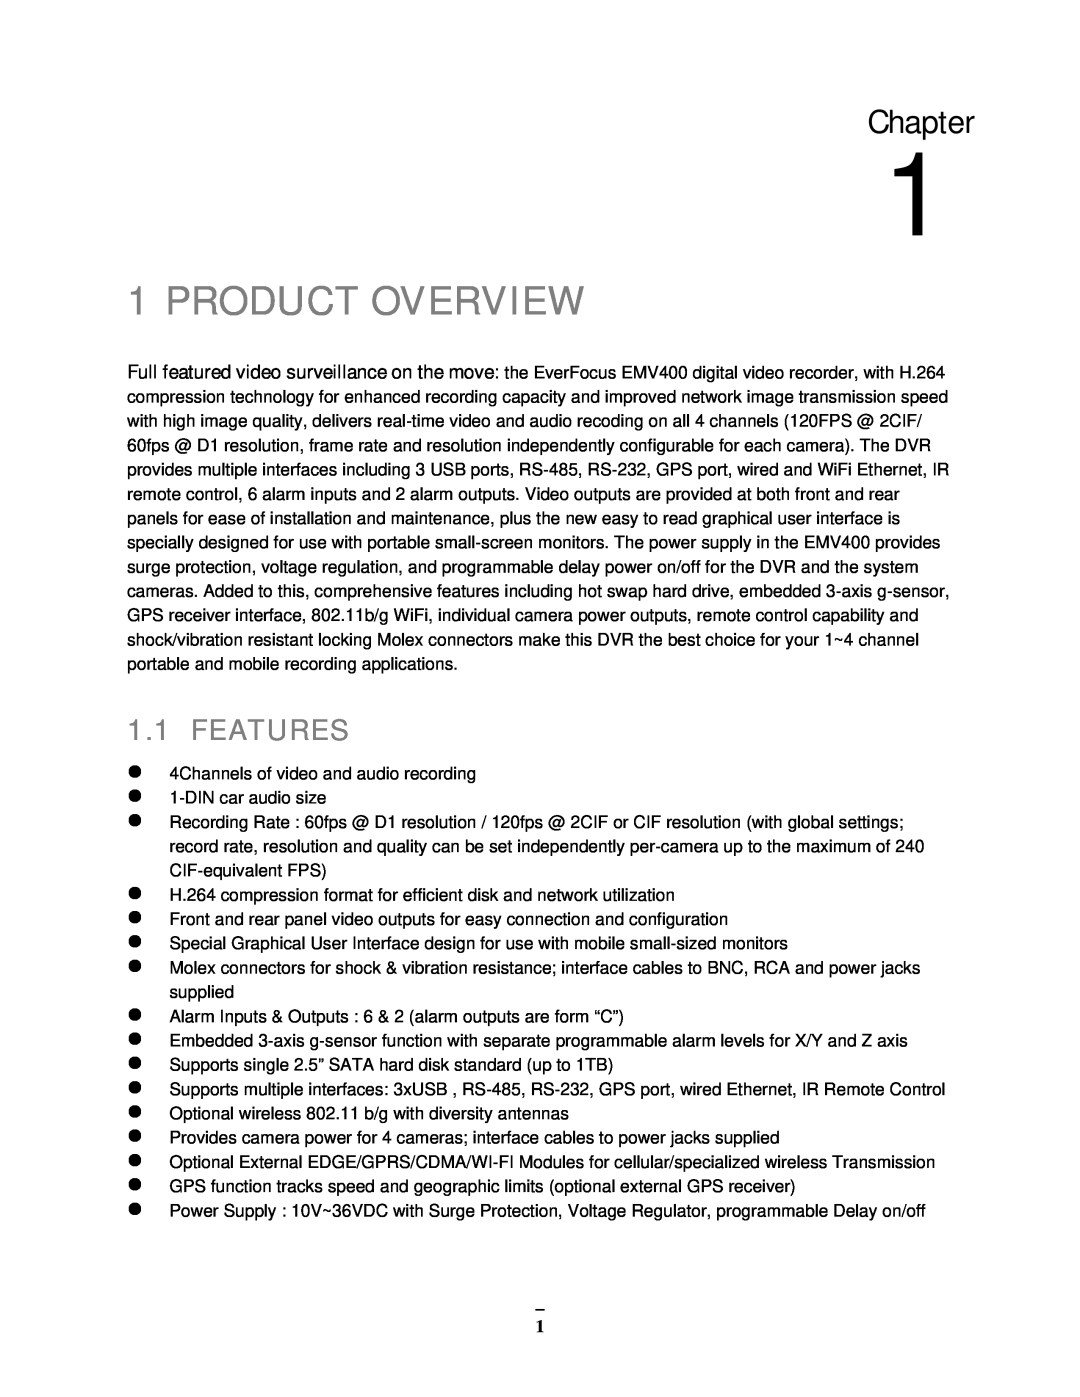 EverFocus EMV400 user manual Product Overview, Chapter, Features 